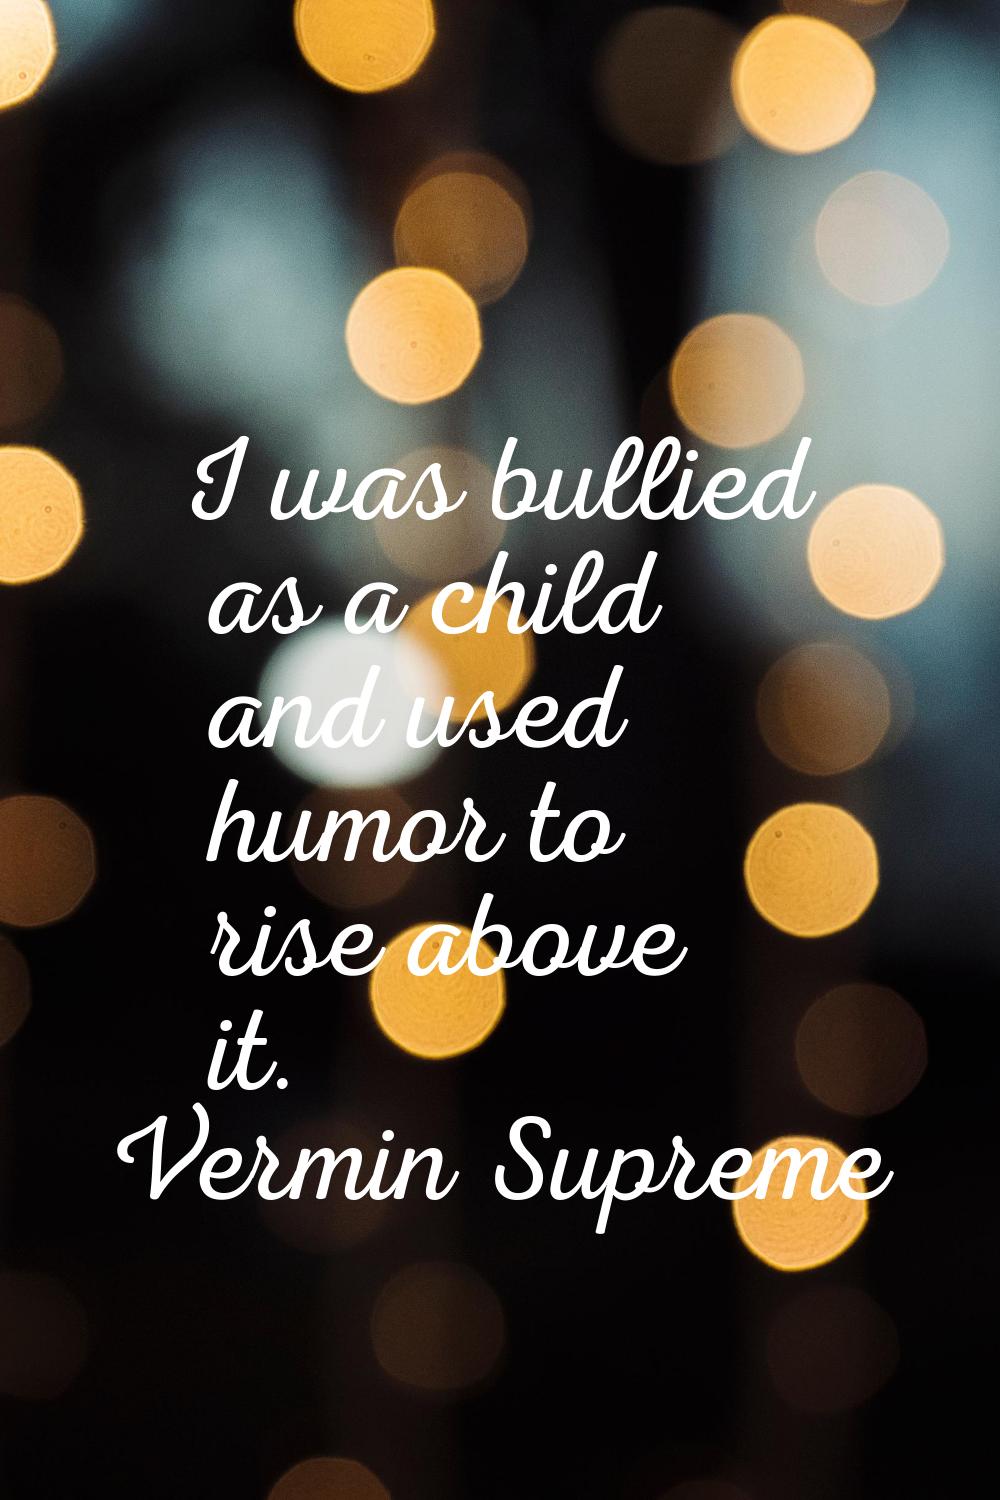 I was bullied as a child and used humor to rise above it.